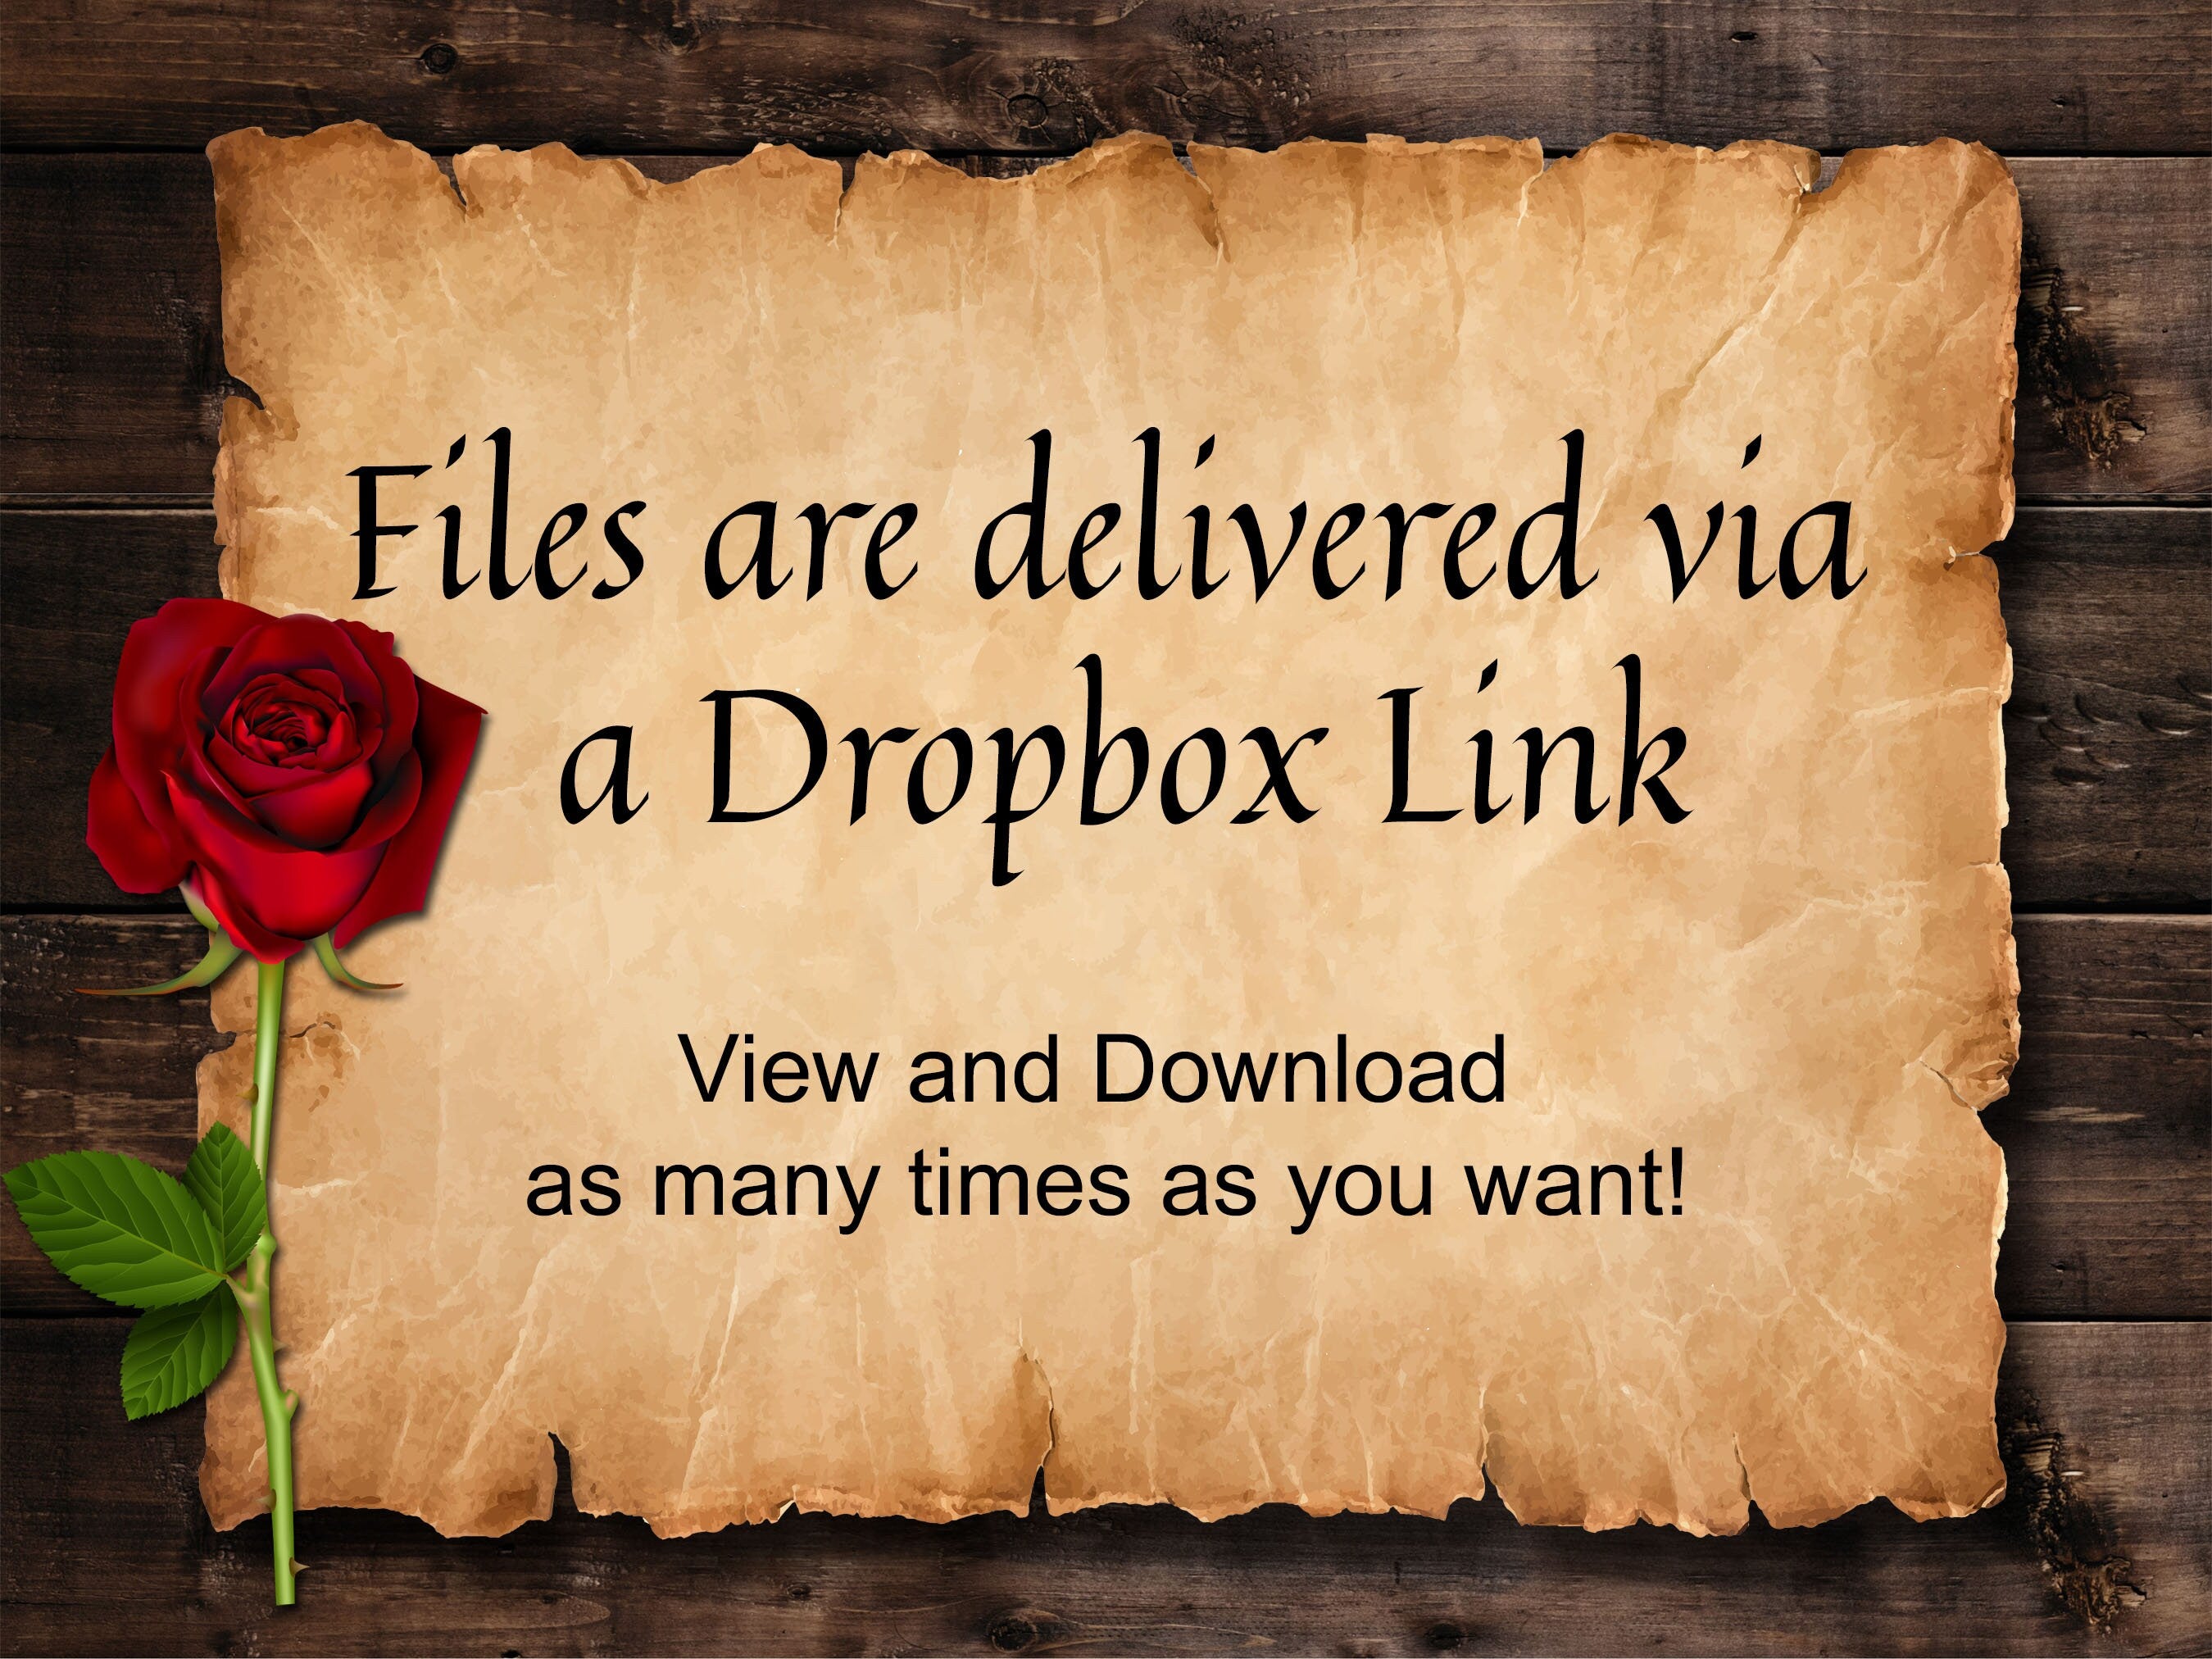 Files are delivered via a Dropbox Link, view and download as many times as you want - Morgana Magick Spell